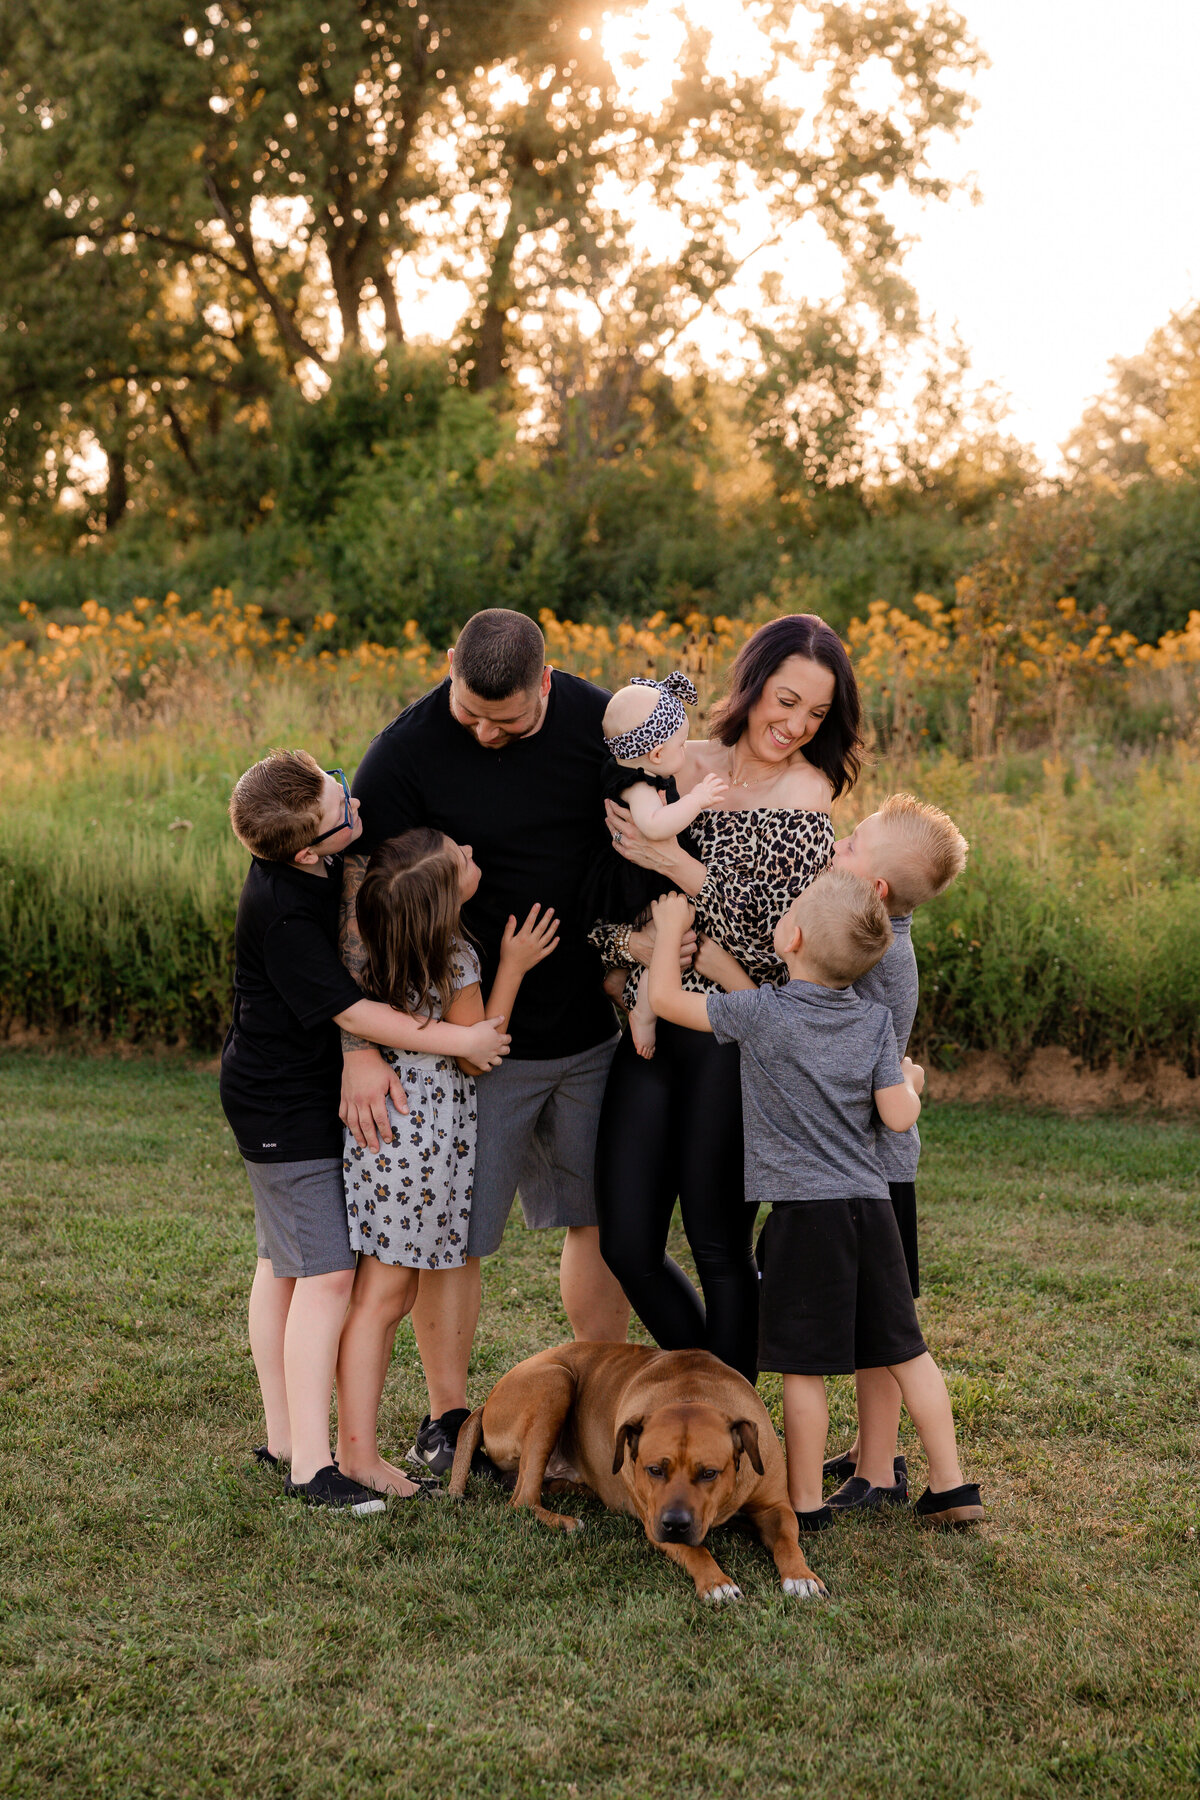 A group hug is shared beween a new blended family in Joliet at sunset.